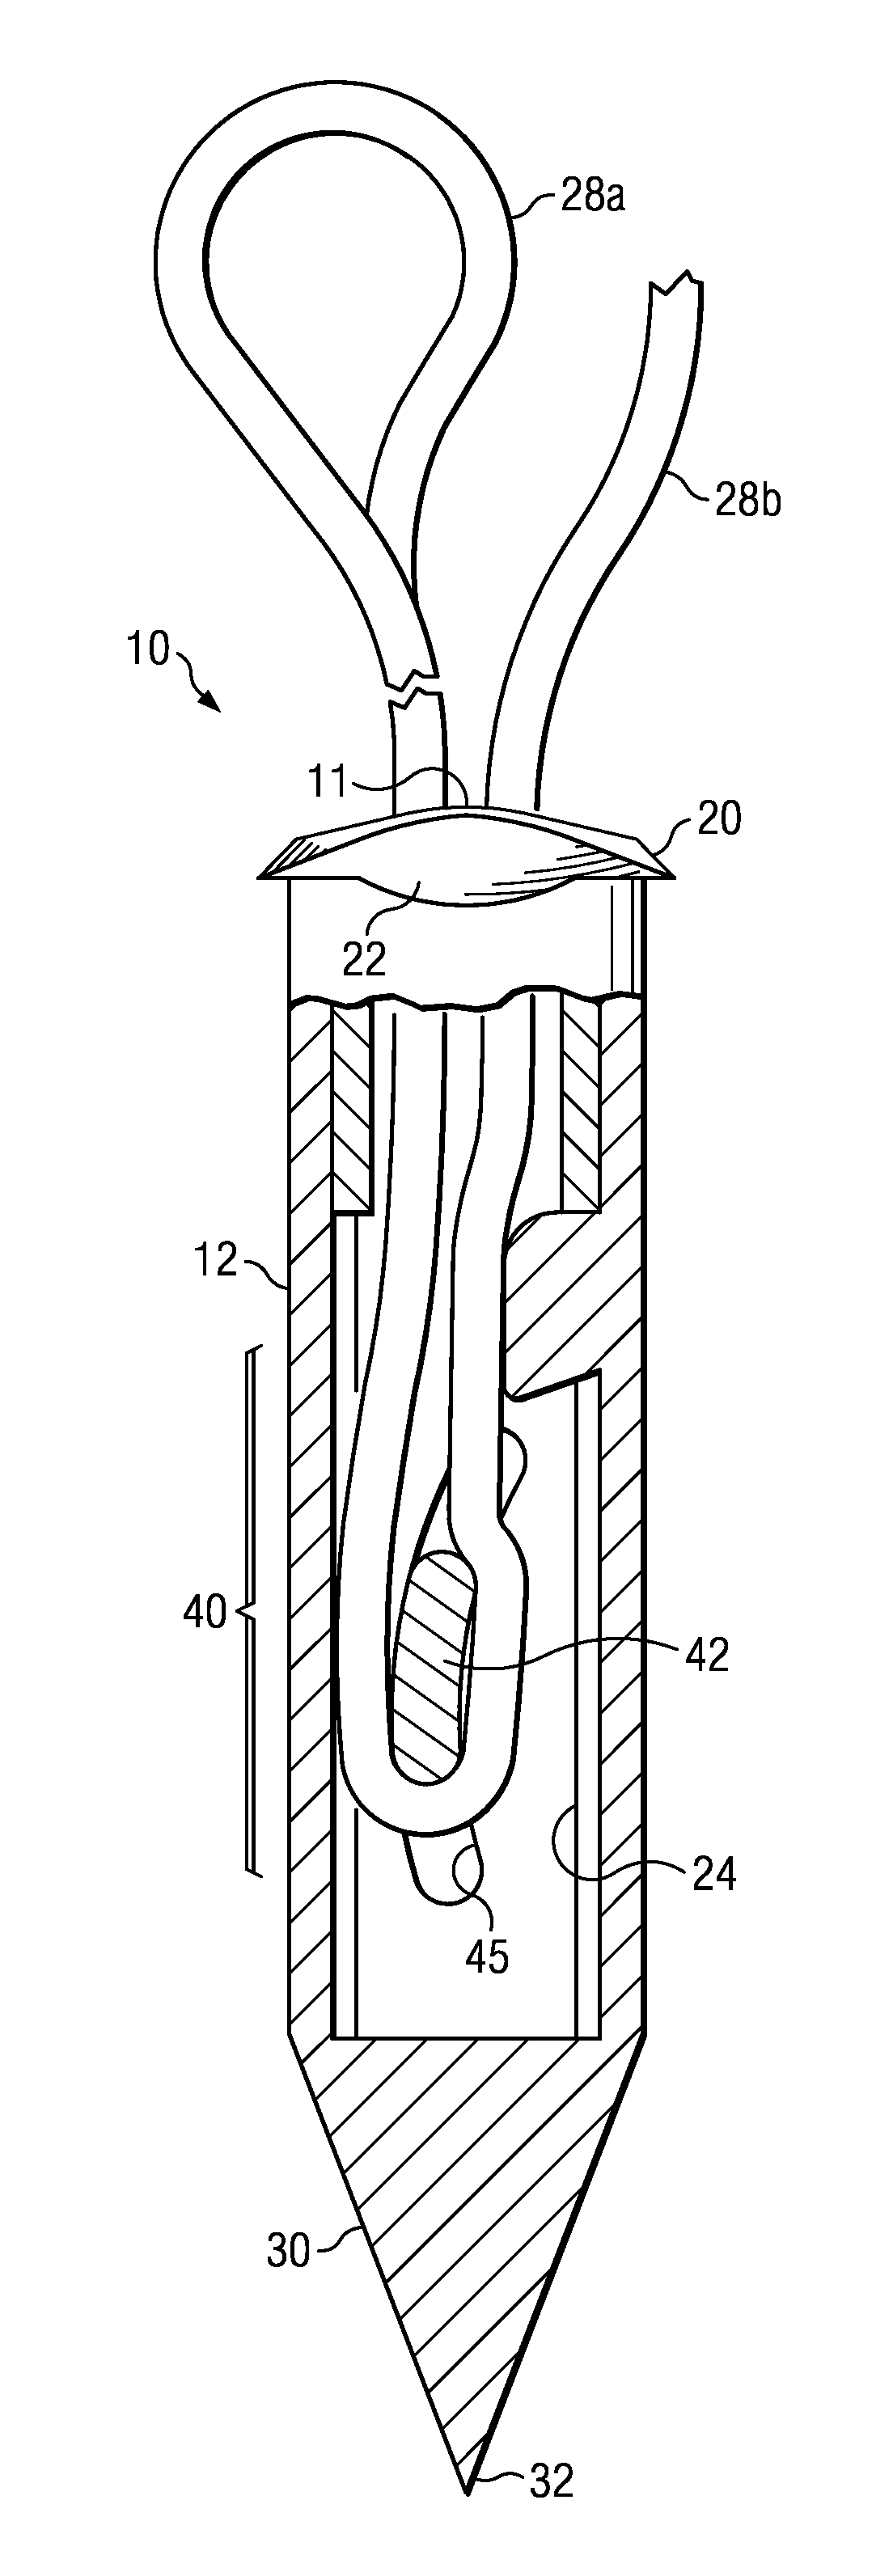 Restricted wedge suture anchor and method for soft tissue repair